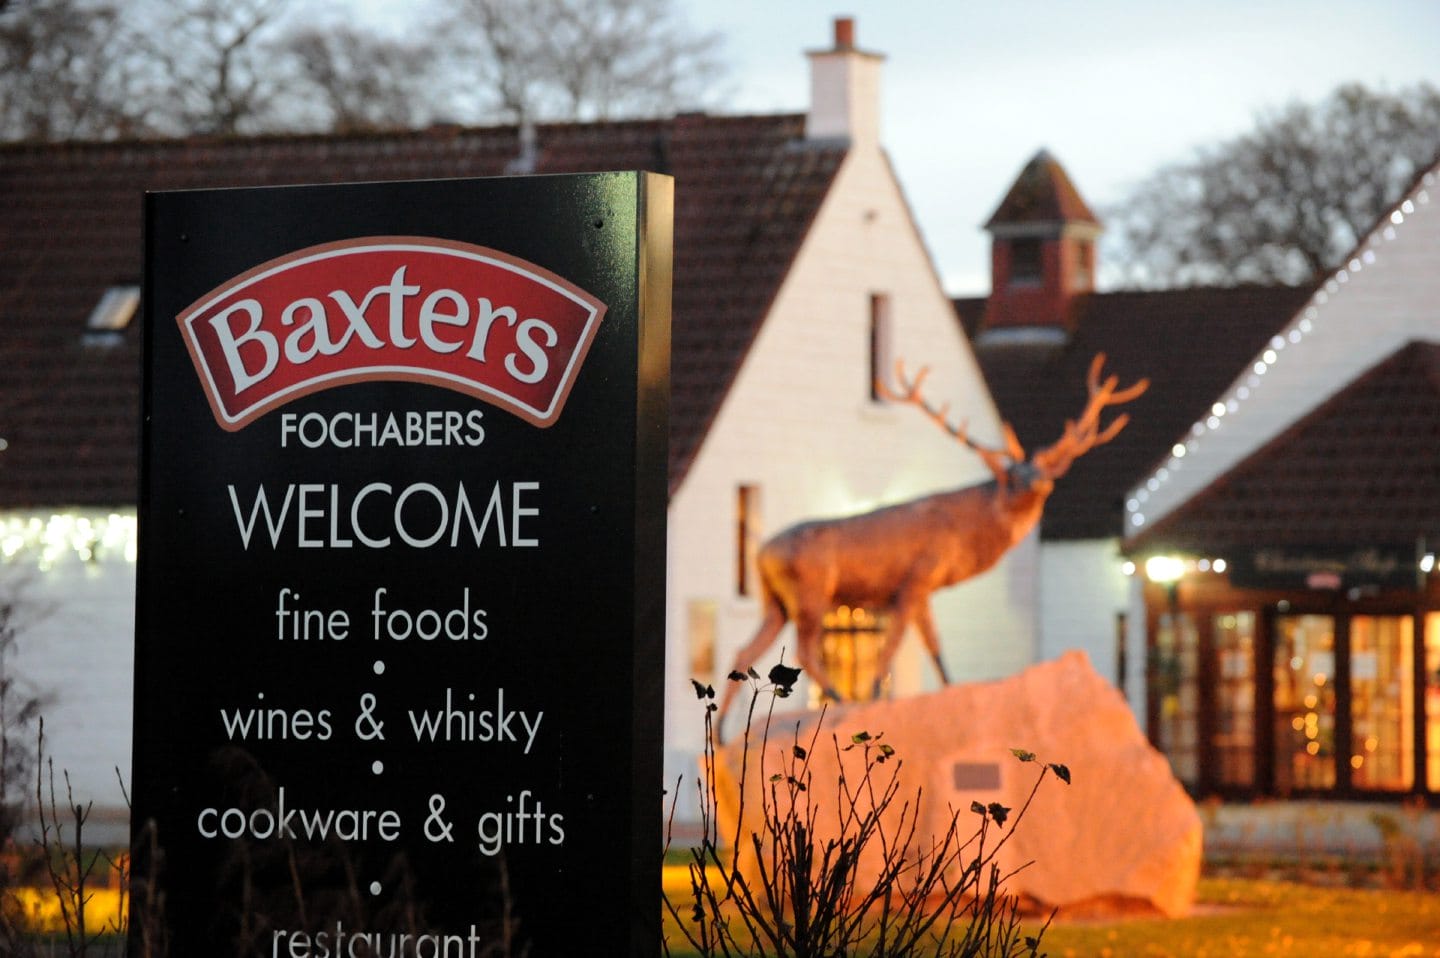 locator of baxters, fochabers. picture by gordon lennox 18/11/2011.